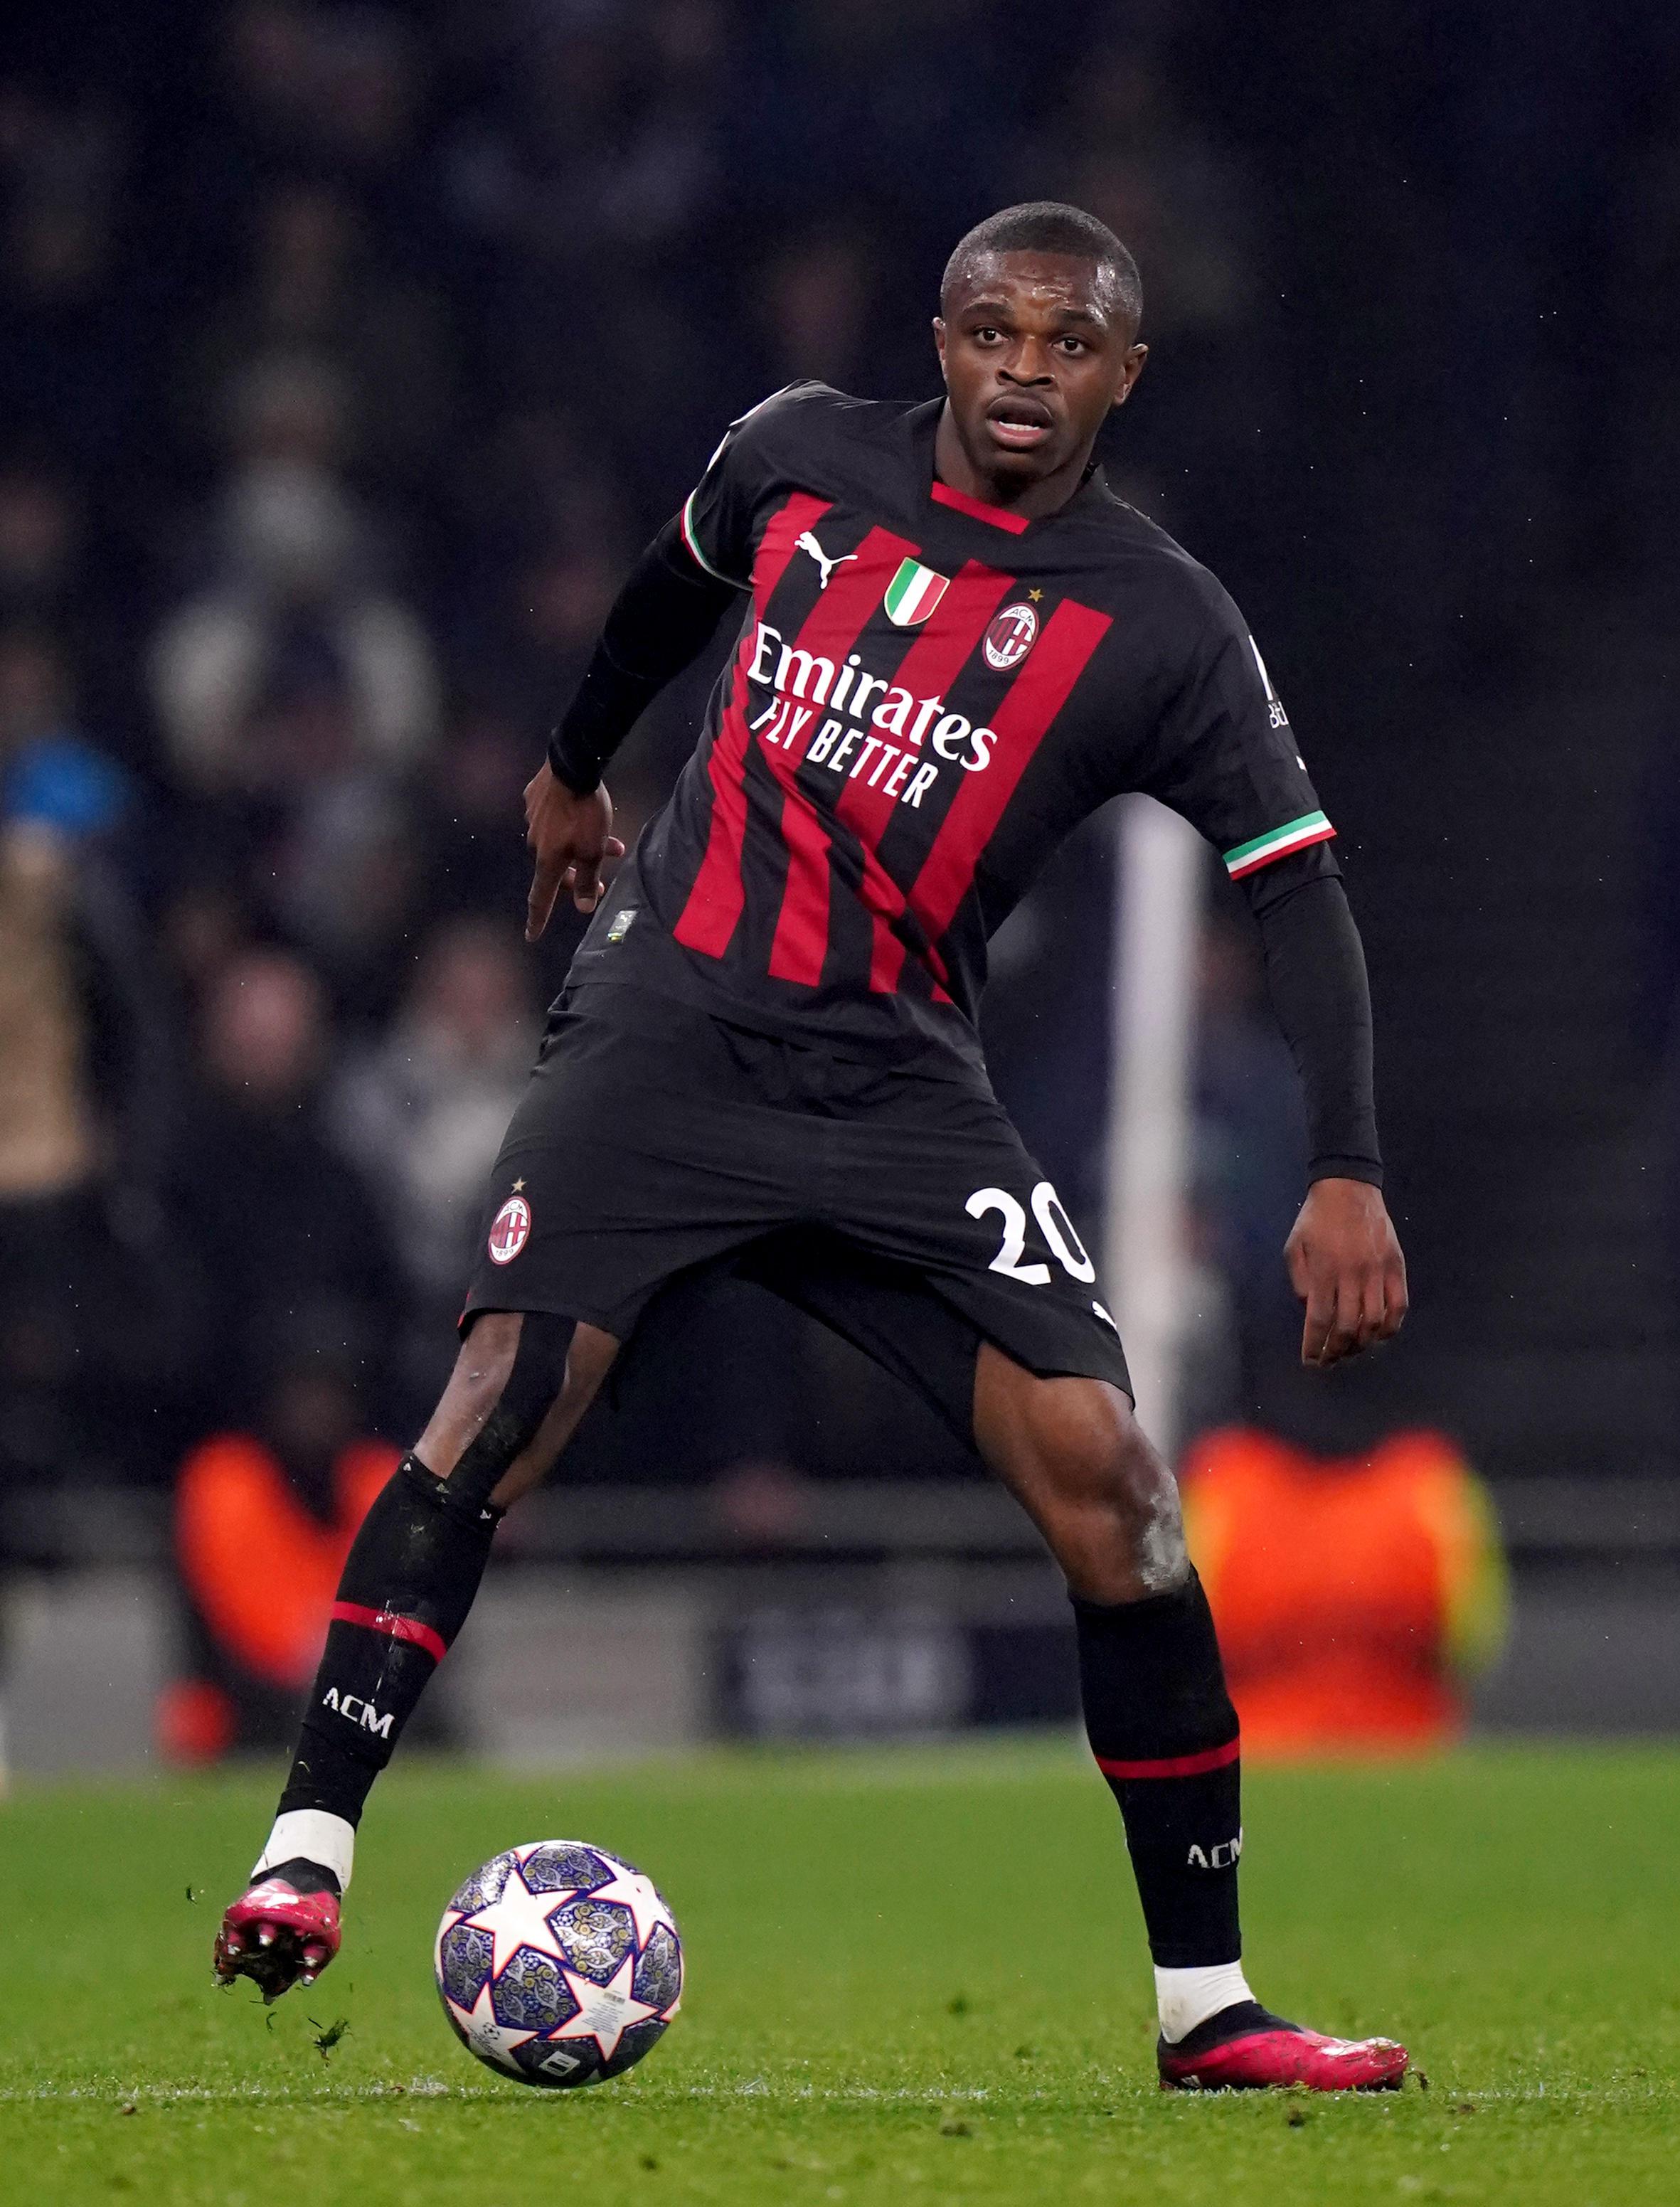 Milan, without Kalulu the defense changes